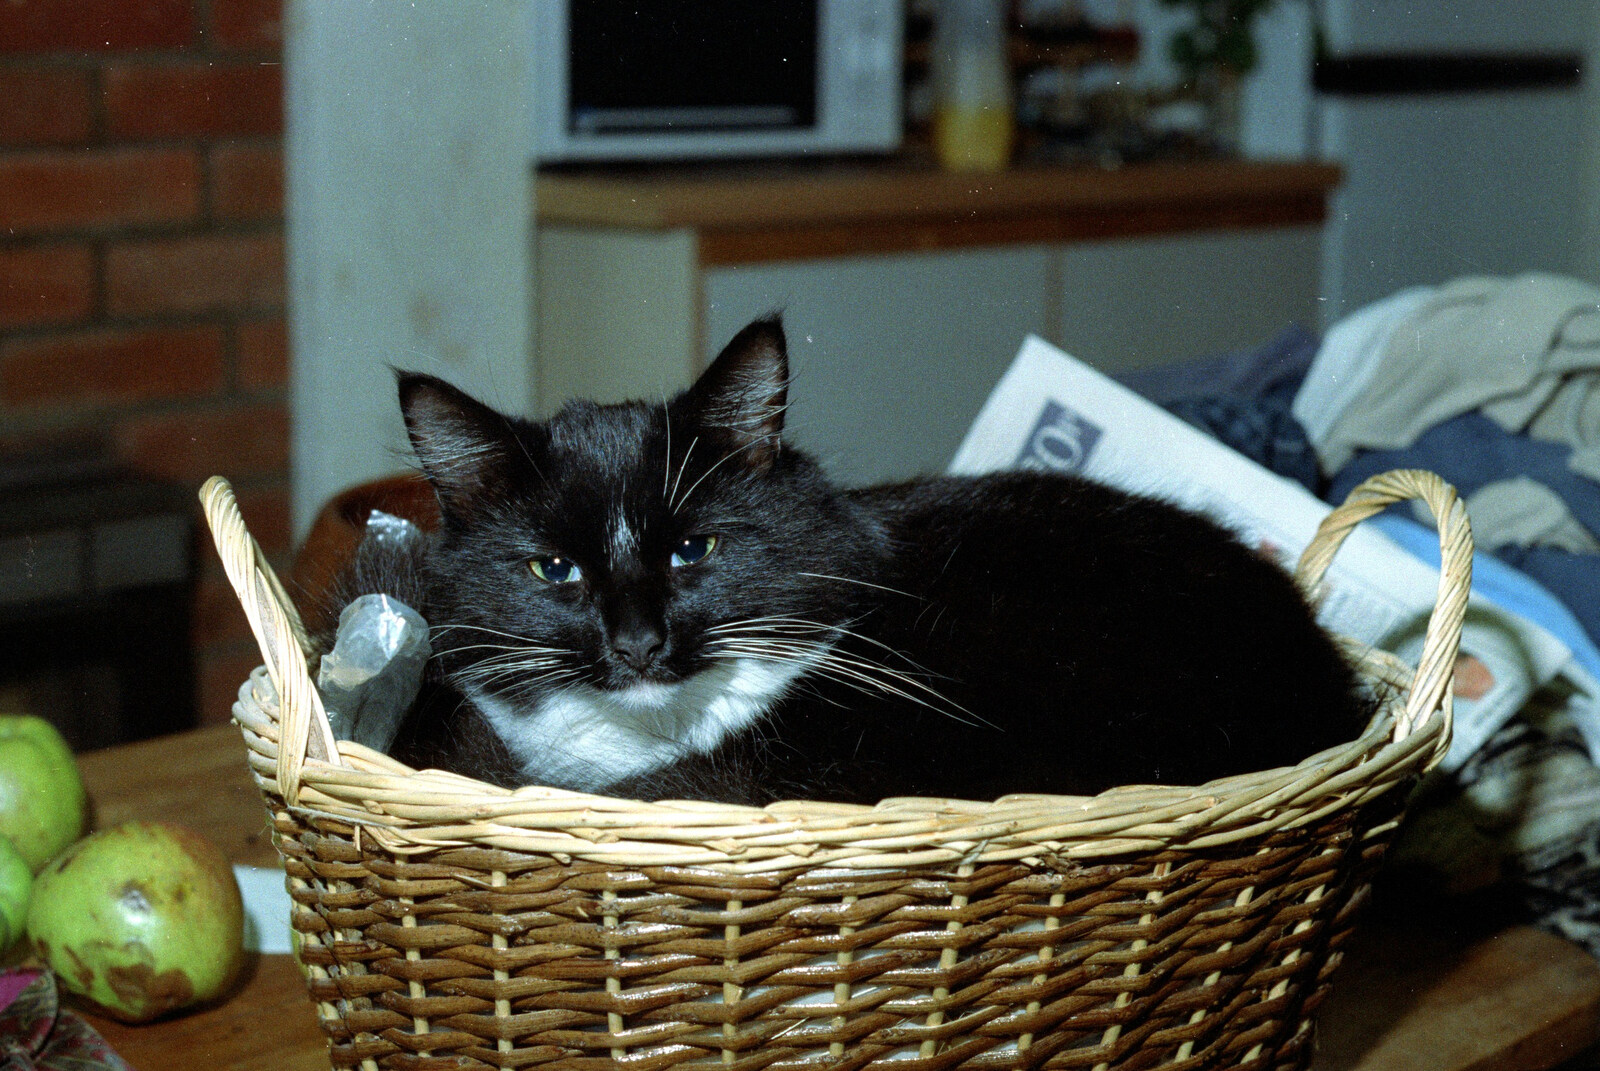 The Sock looks up from her basket from Bedroom Demolition, Brome, Suffolk - 10th October 1994